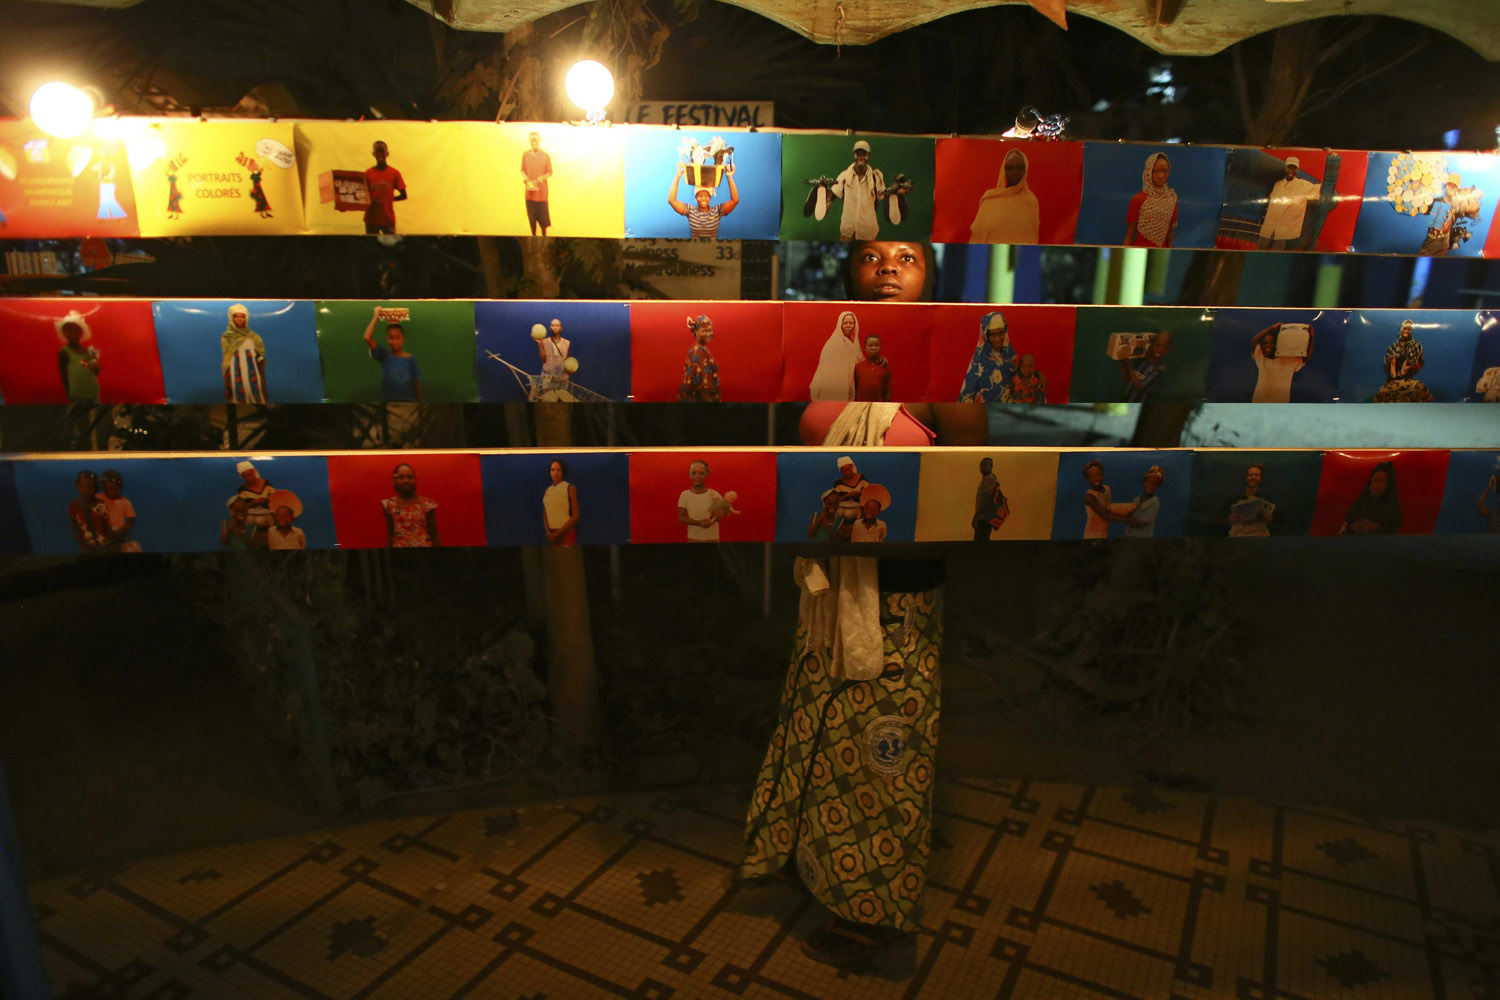 Feb. 24, 2013. A girl from Burkina Faso looks at a photography exhibition during the Panafrican Film and Television Festival in Ouagadougou, Burkina Faso.